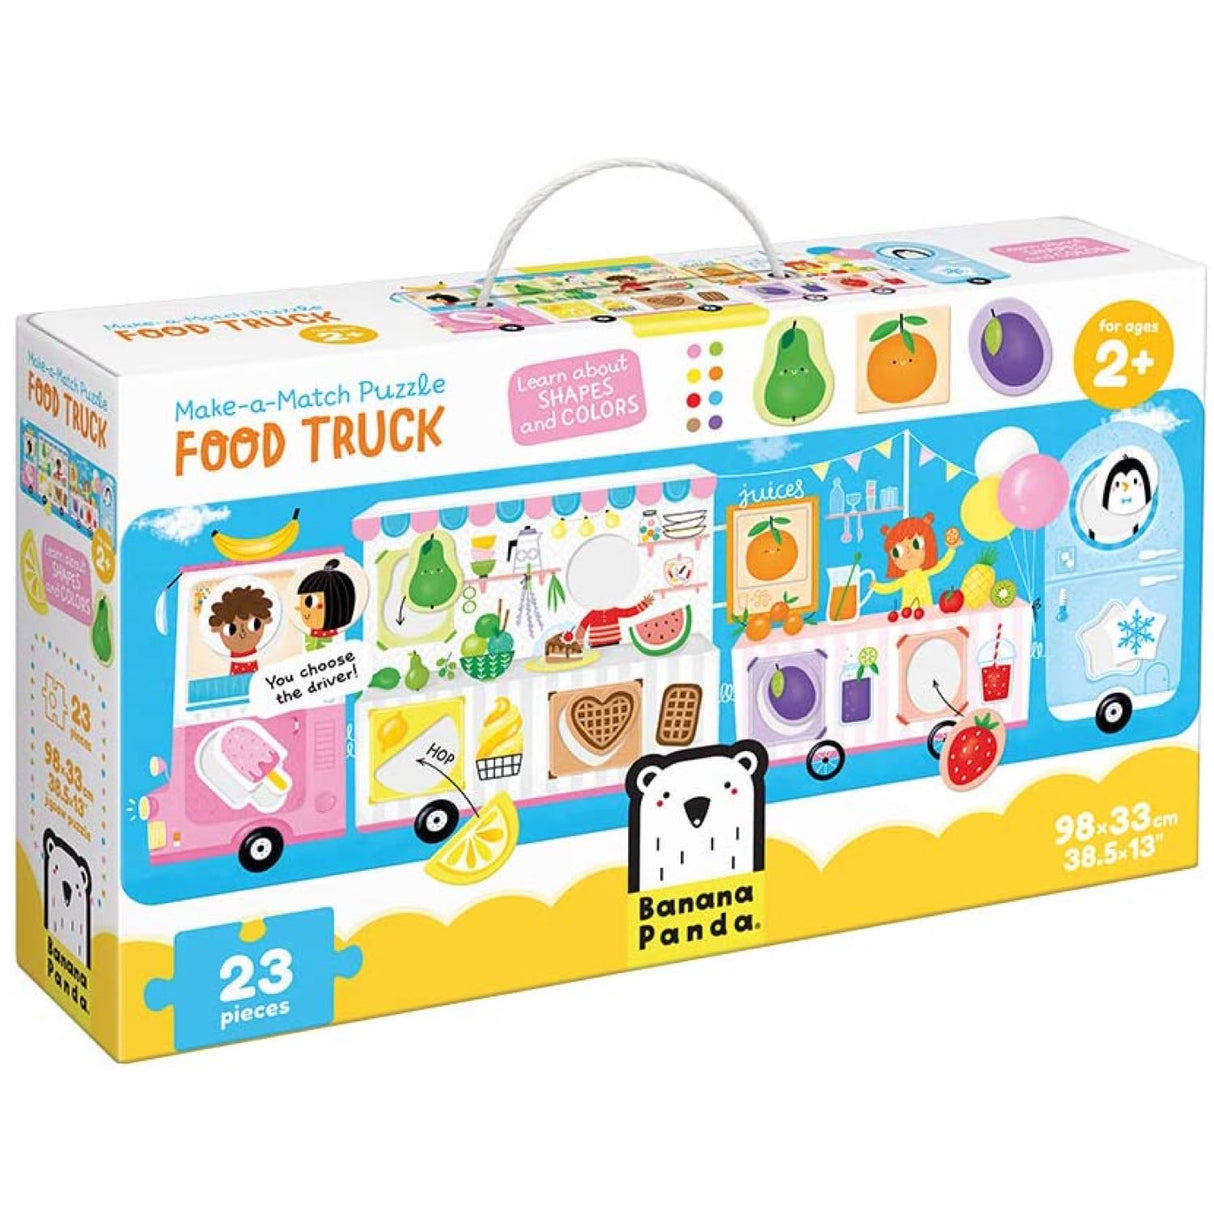 23pc Food Truck Match Puzzle